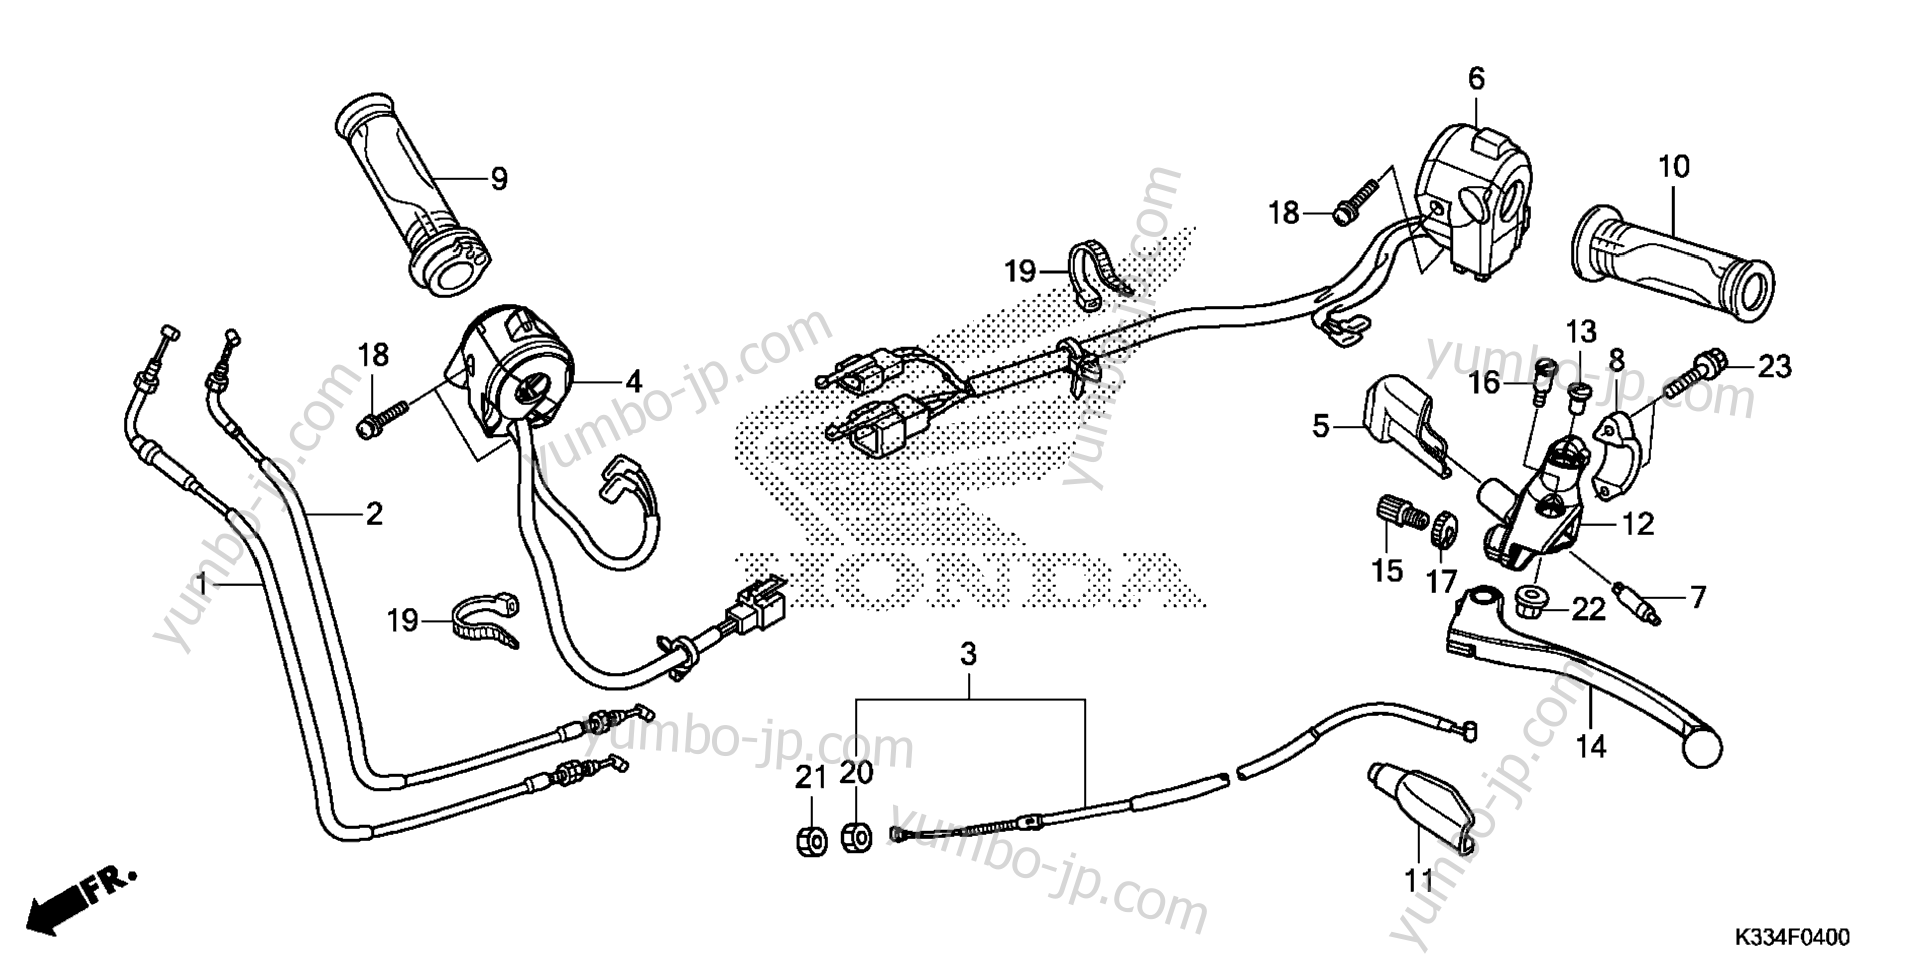 HANDLE LEVER / SWITCH / CABLE for motorcycles HONDA CBR300RA 9AC 2015 year